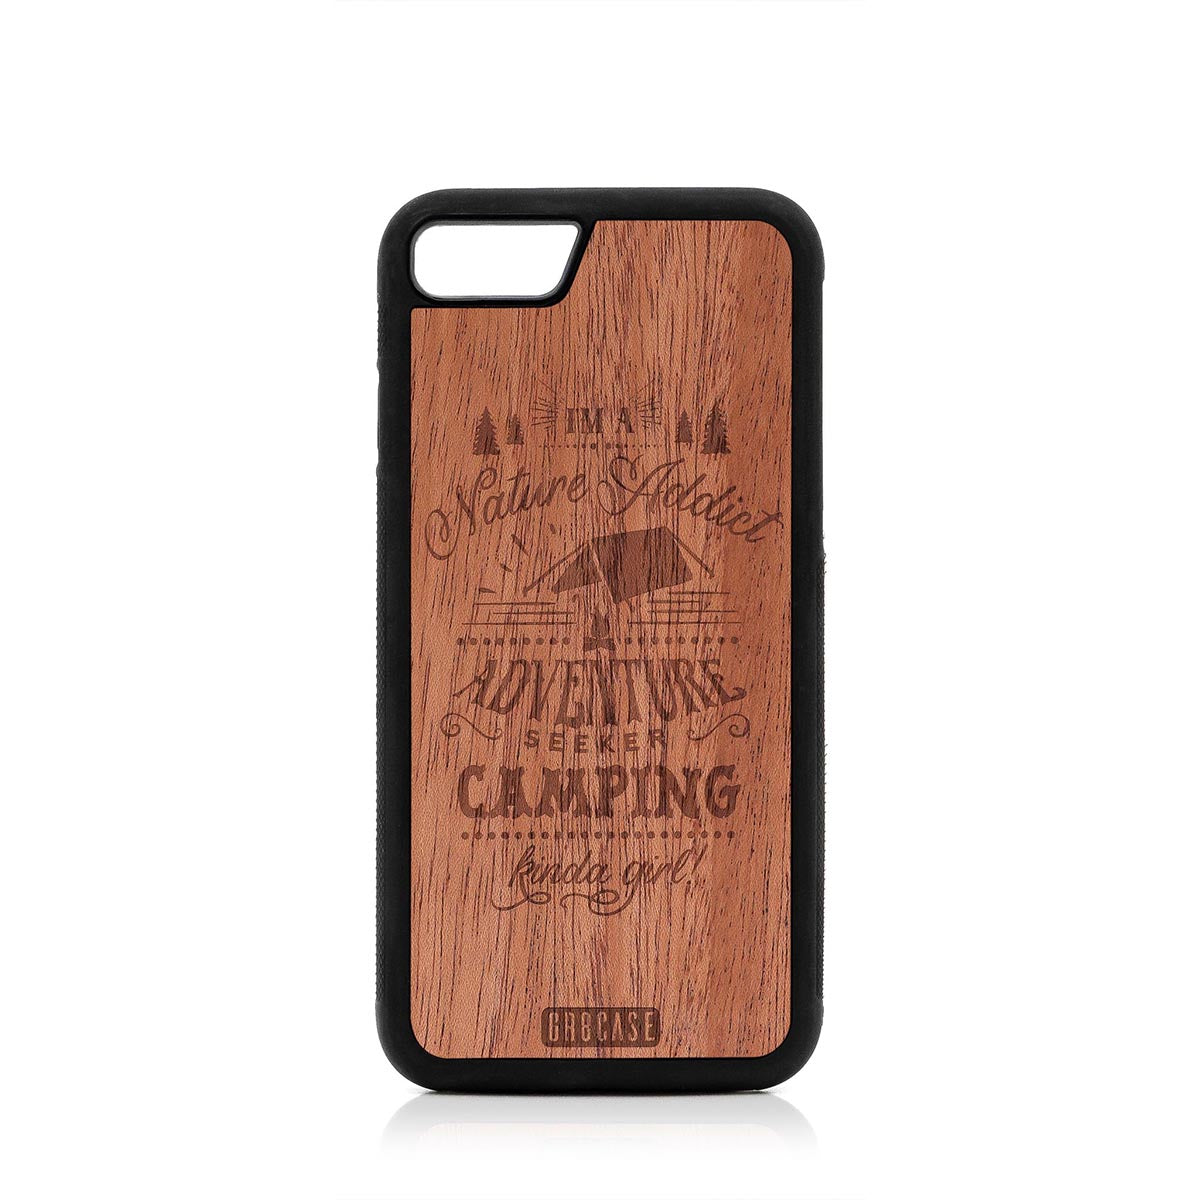 I'm A Nature Addict Adventure Seeker Camping Kinda Girl Design Wood Case For iPhone 7/8 by GR8CASE